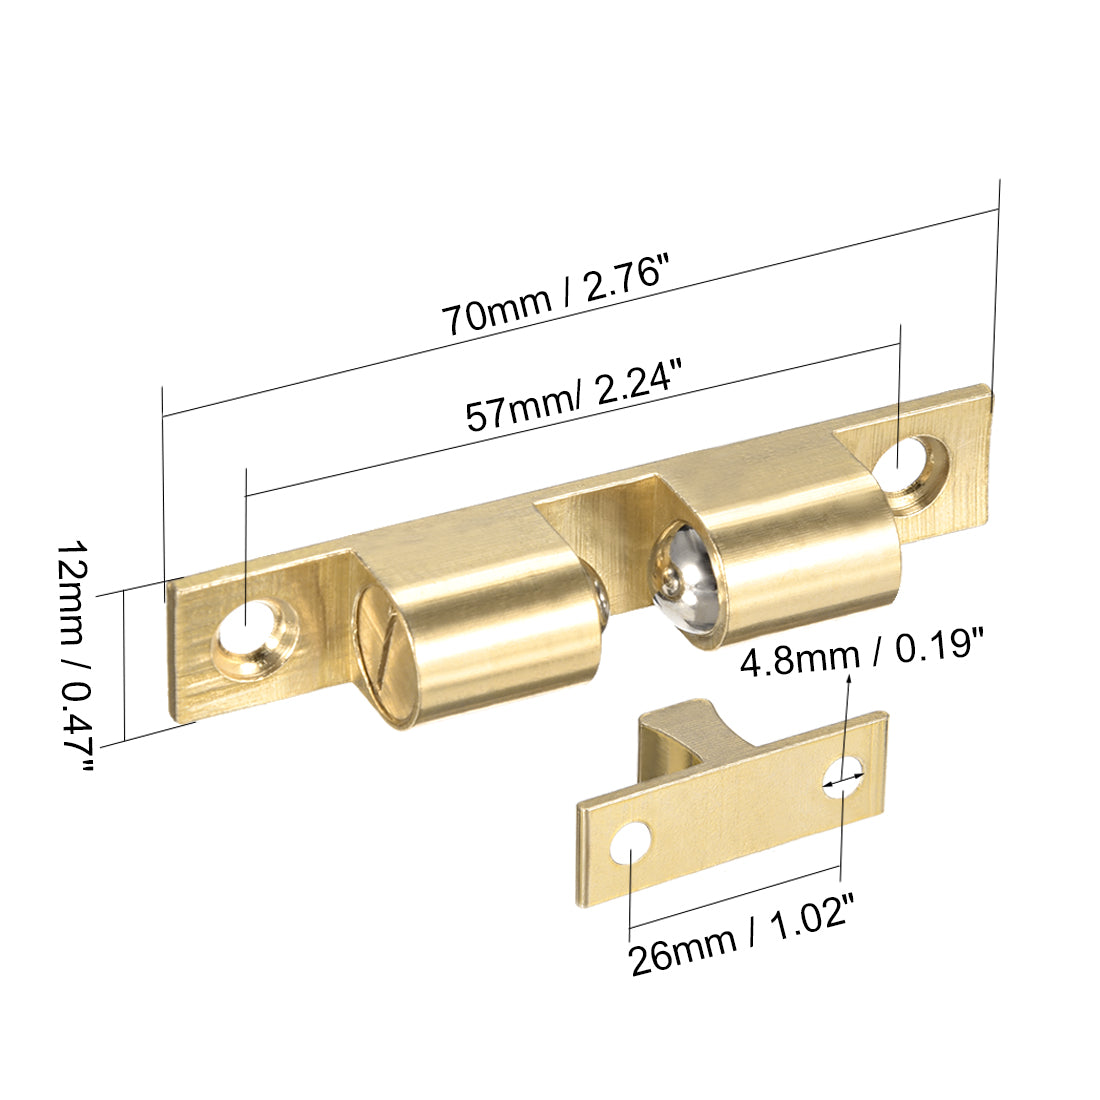 uxcell Uxcell Cabinet Door Closet Brass Double Ball Catch Tension Latch 70mm Length Gold Tone 5pcs